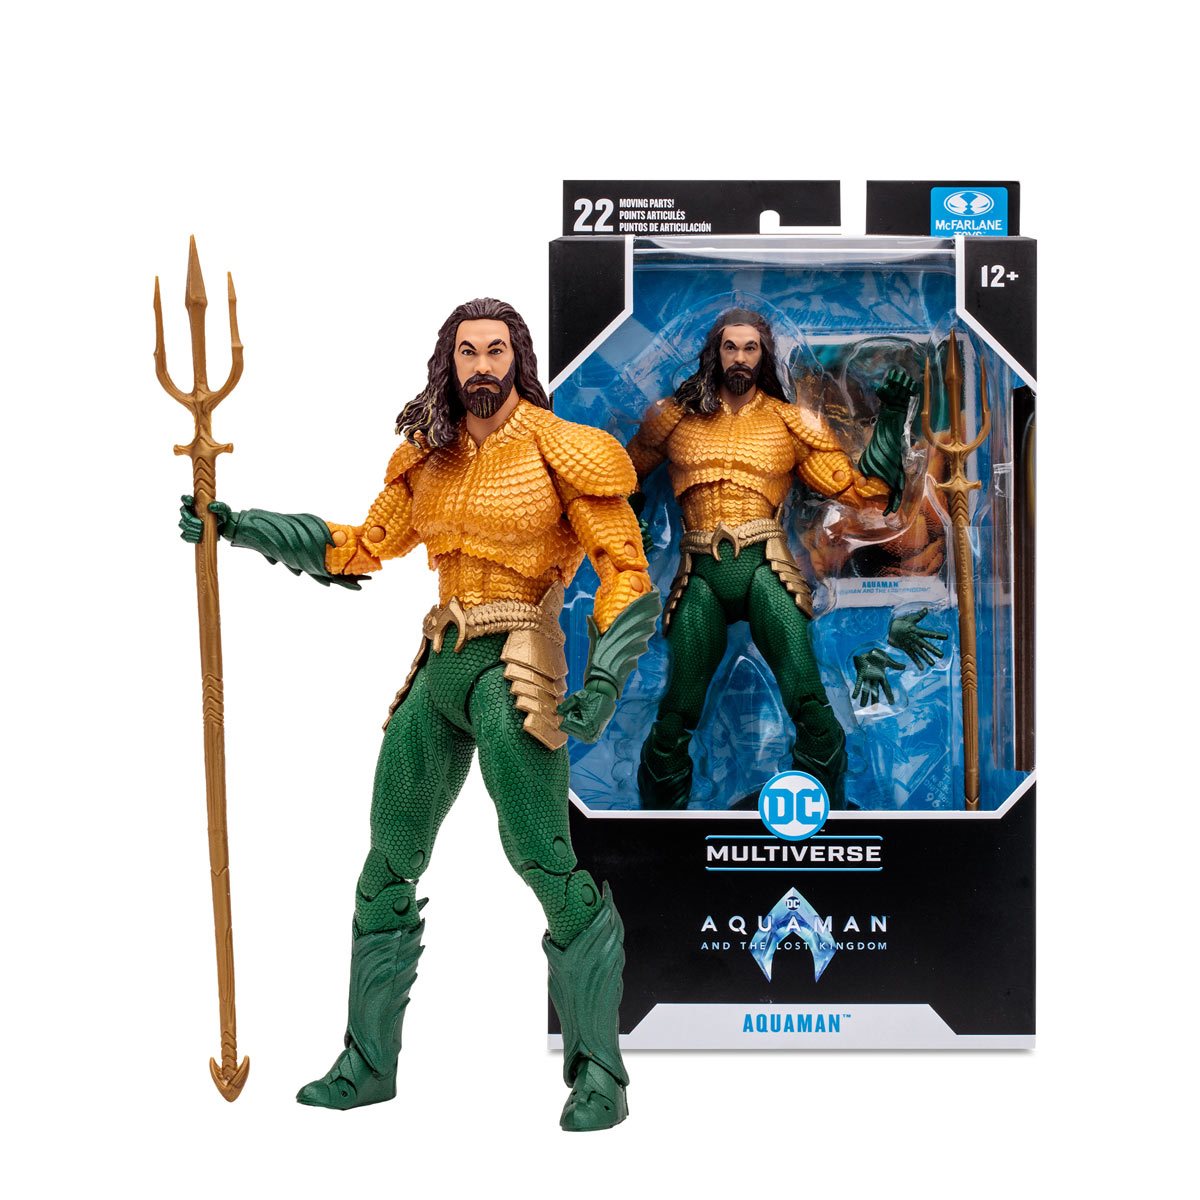 DC Multiverse - Aquaman and the Lost Kingdom Movie: Aquaman 7-Inch Scale Action Figure